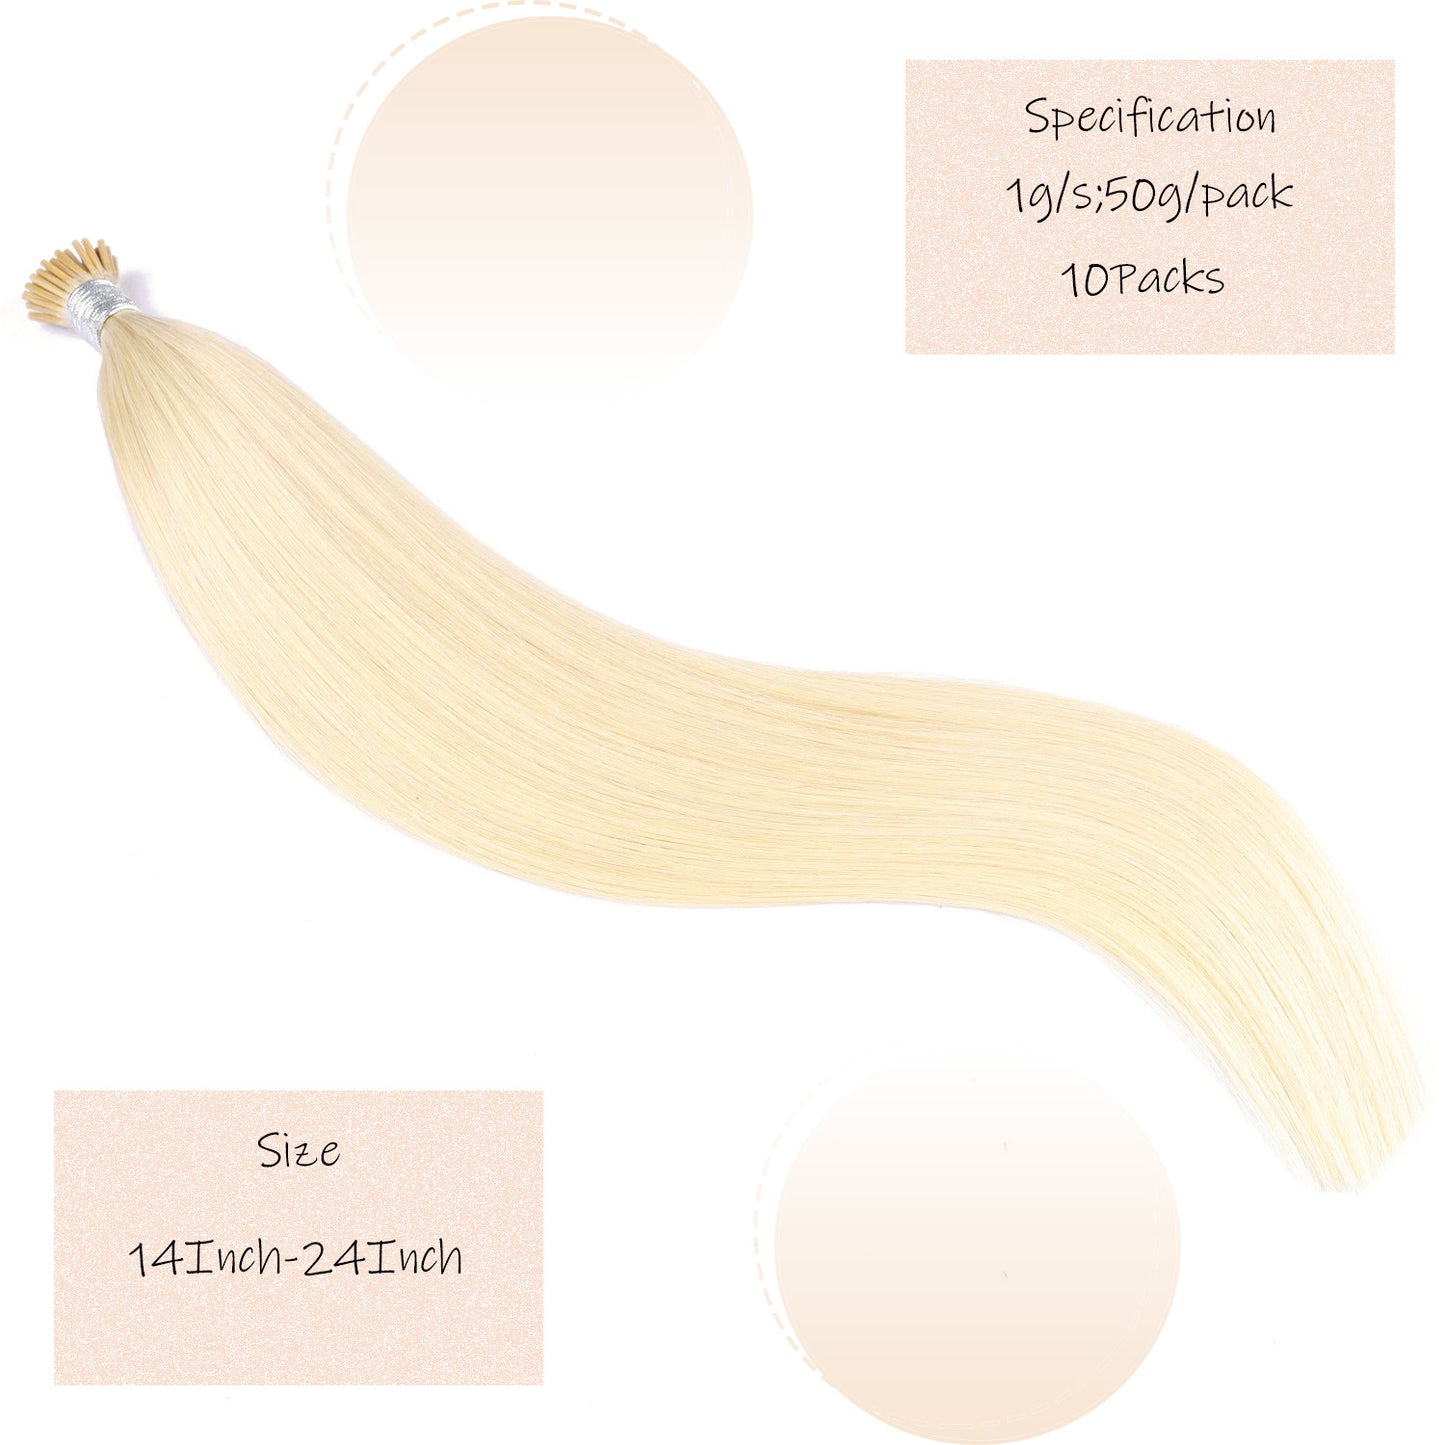 Eliysako I Tip Hair Extensions Human Hair,Cold Fusion Soft Abnormal Hair Extensions 50 Strands Pre Keratin Bonded, Itip Human Hair Extensions,50g/Pack